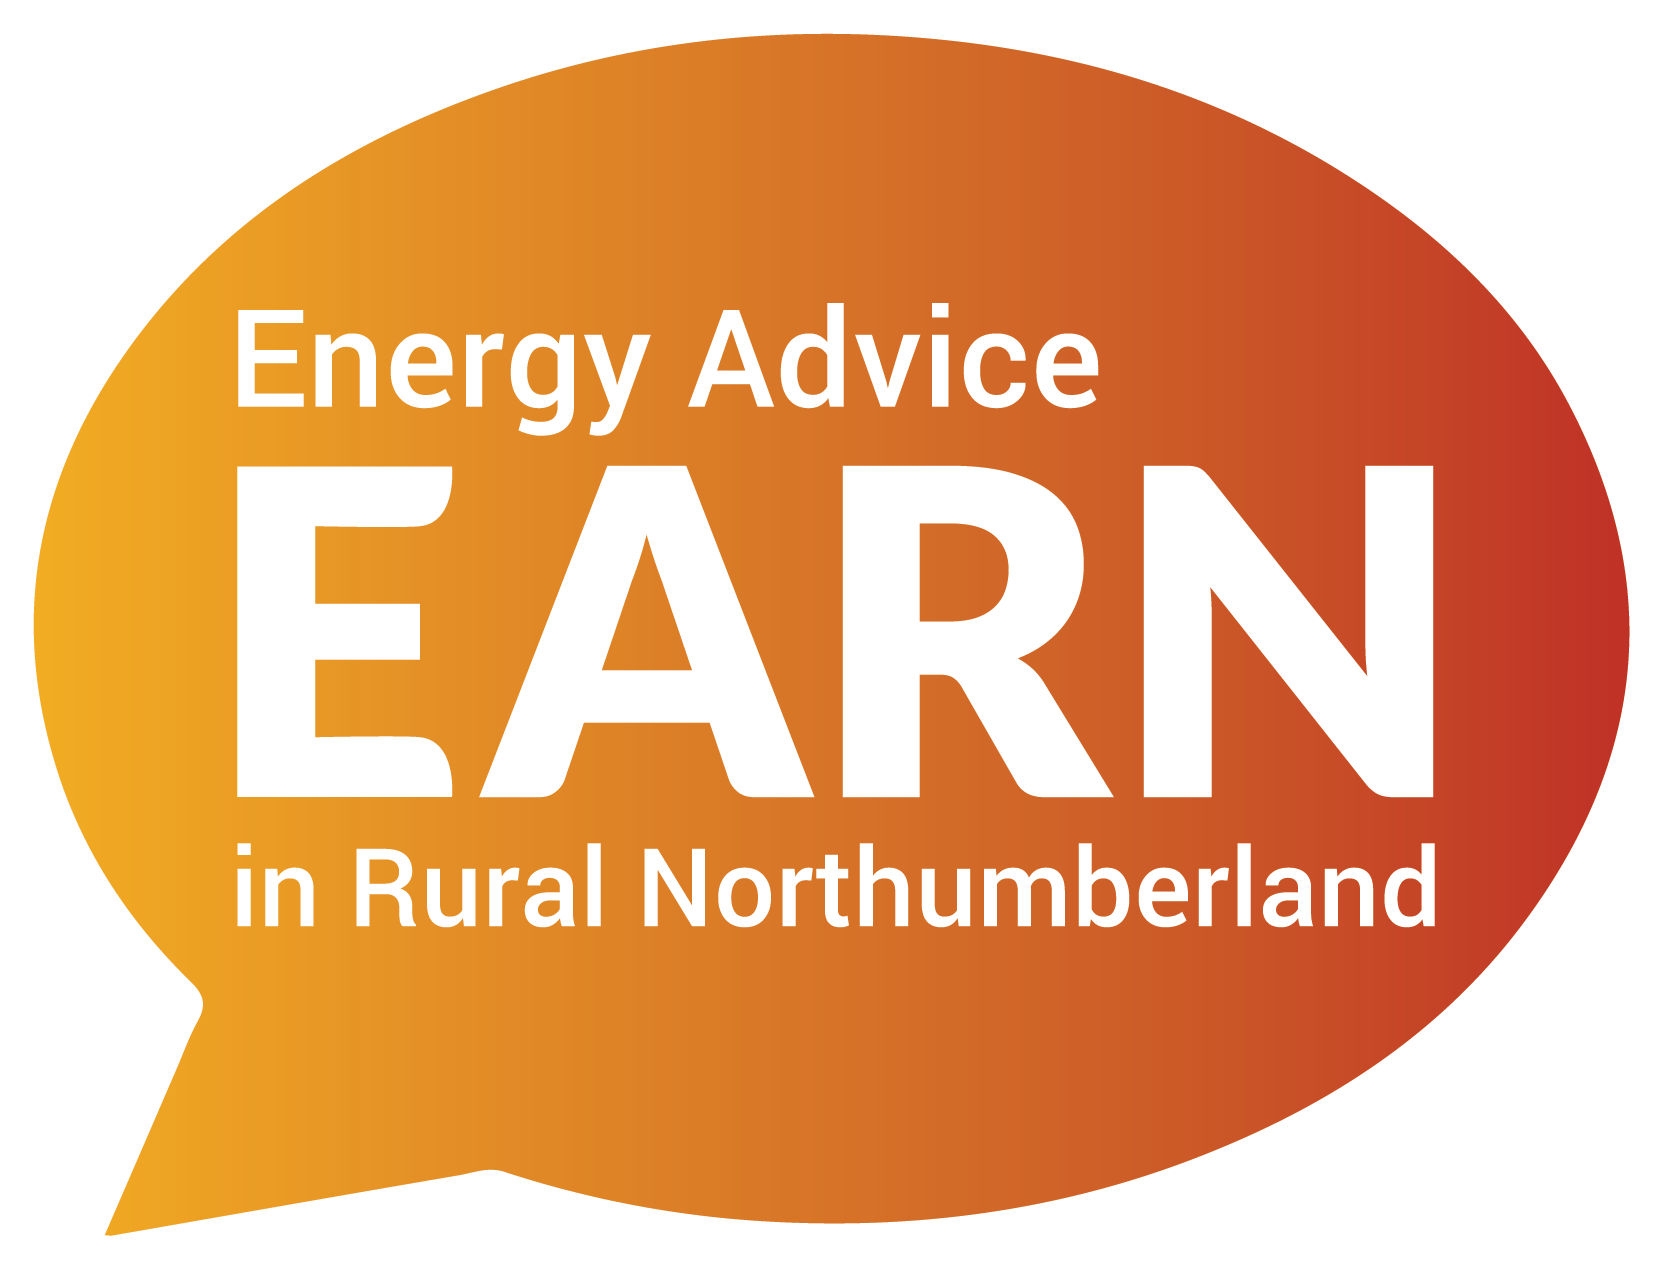 CAN launches new energy advice website EARN featured image